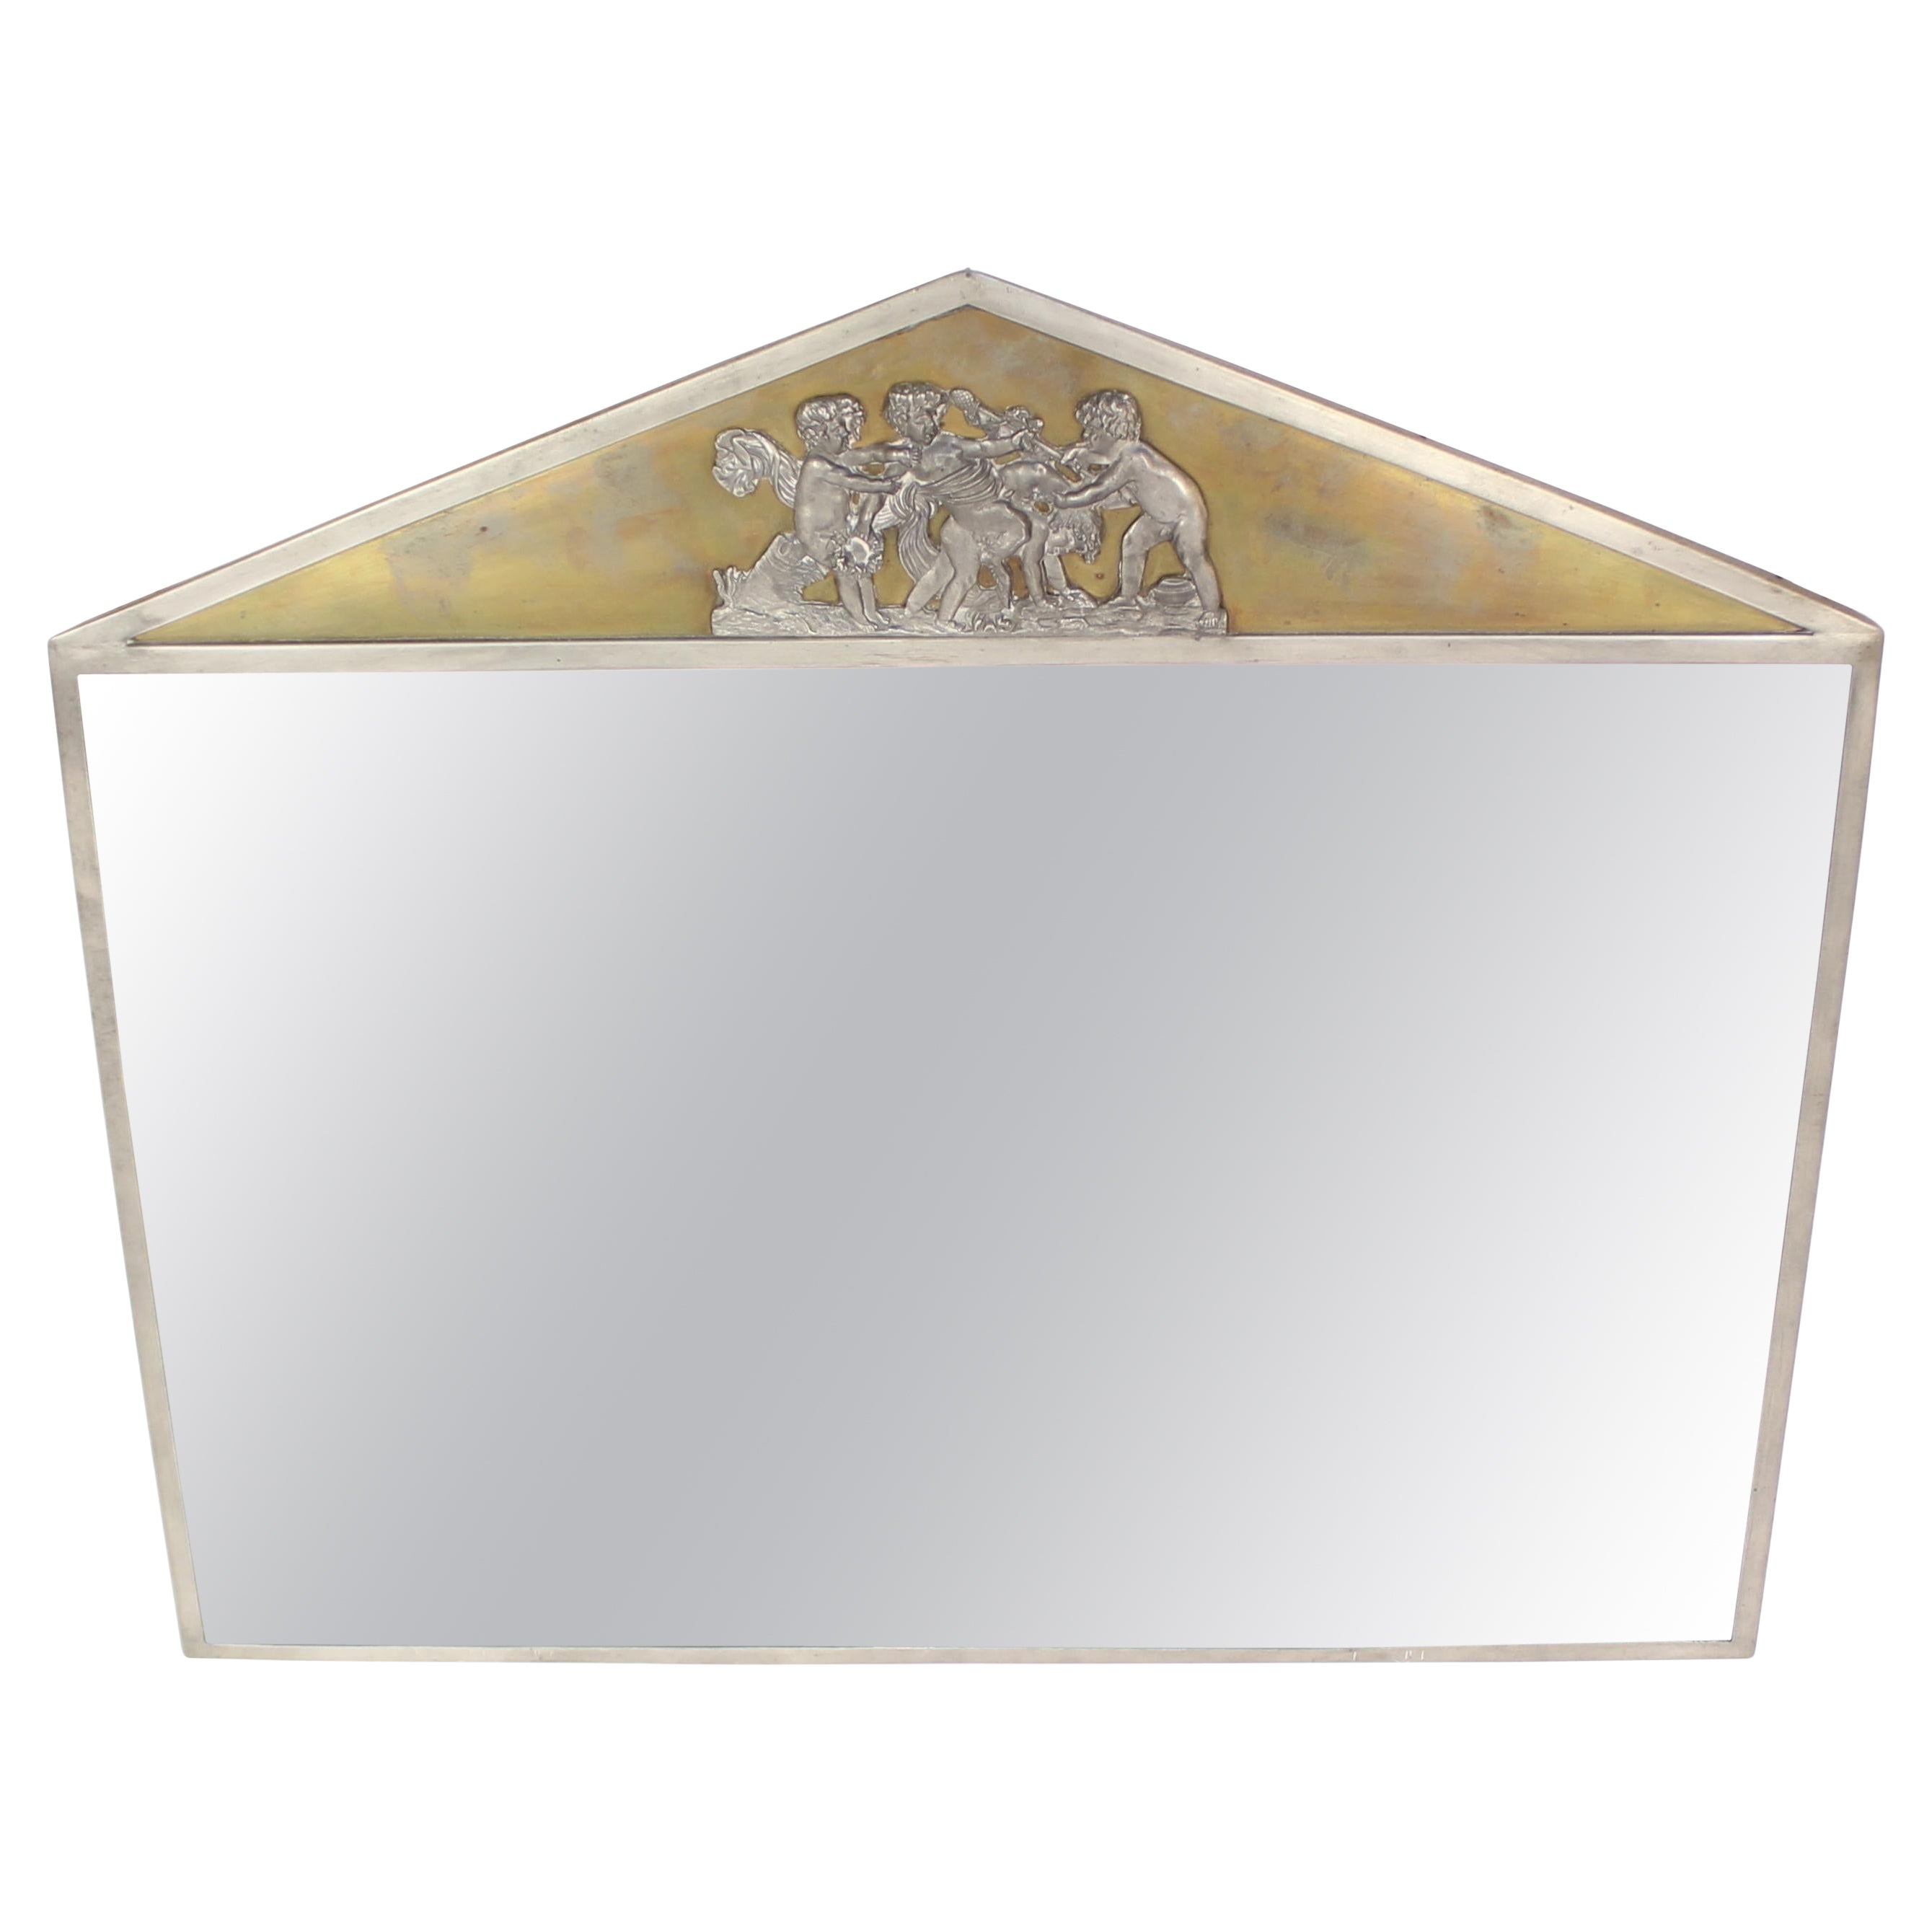 Unique Swedish Grace Pewter and Brass Mirror by C.G. Råström, 1928 For Sale